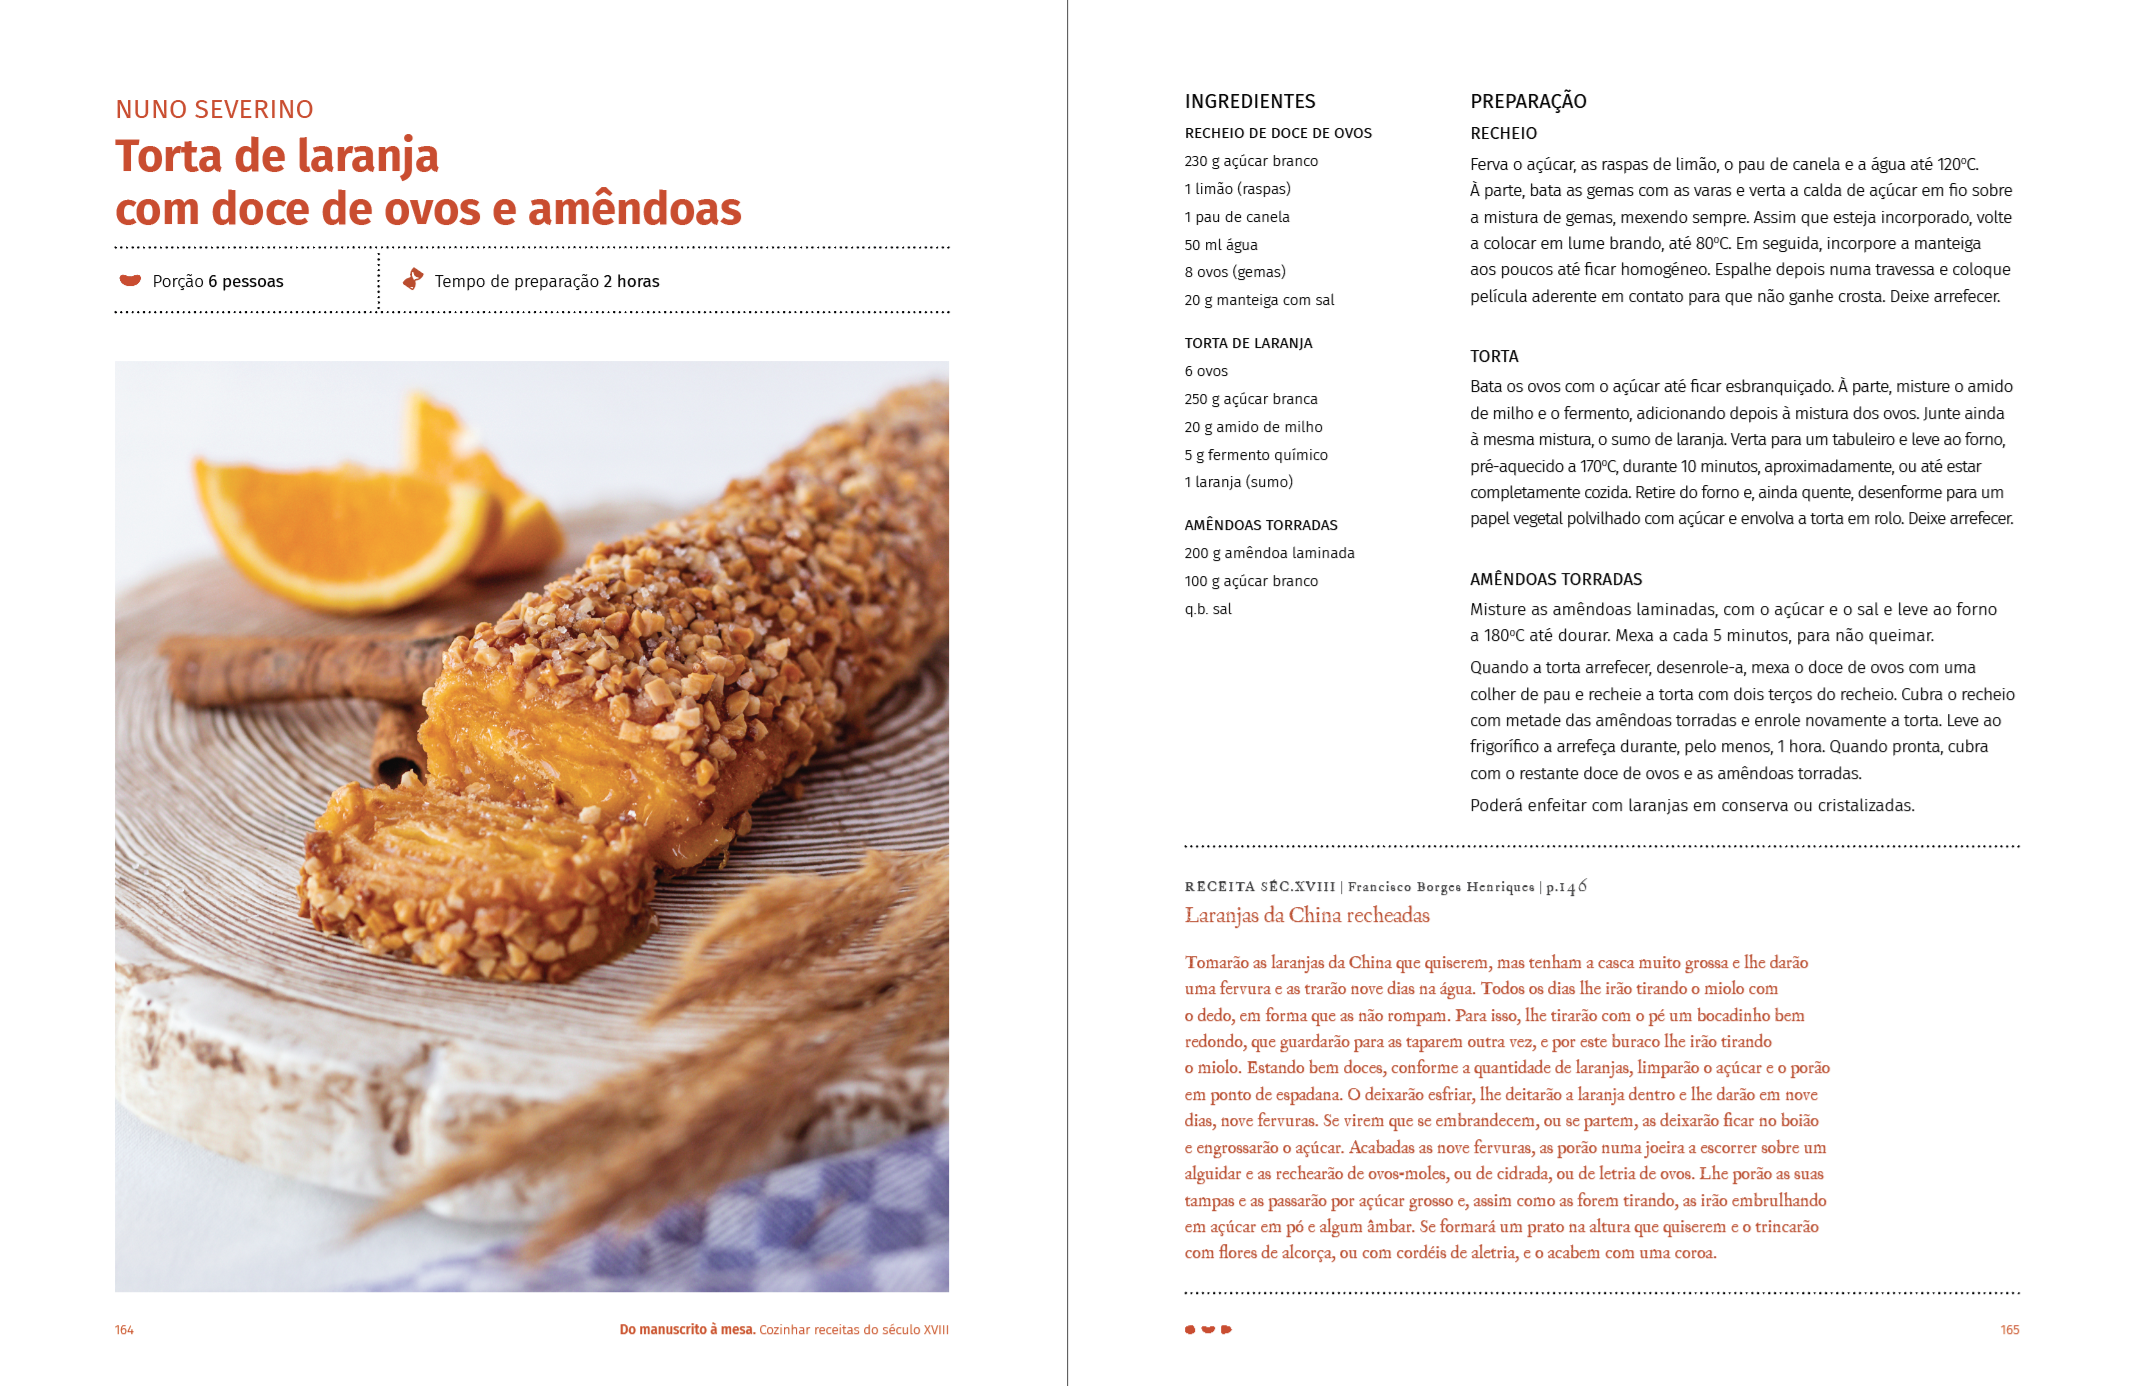 One page of the e-book with recipes.